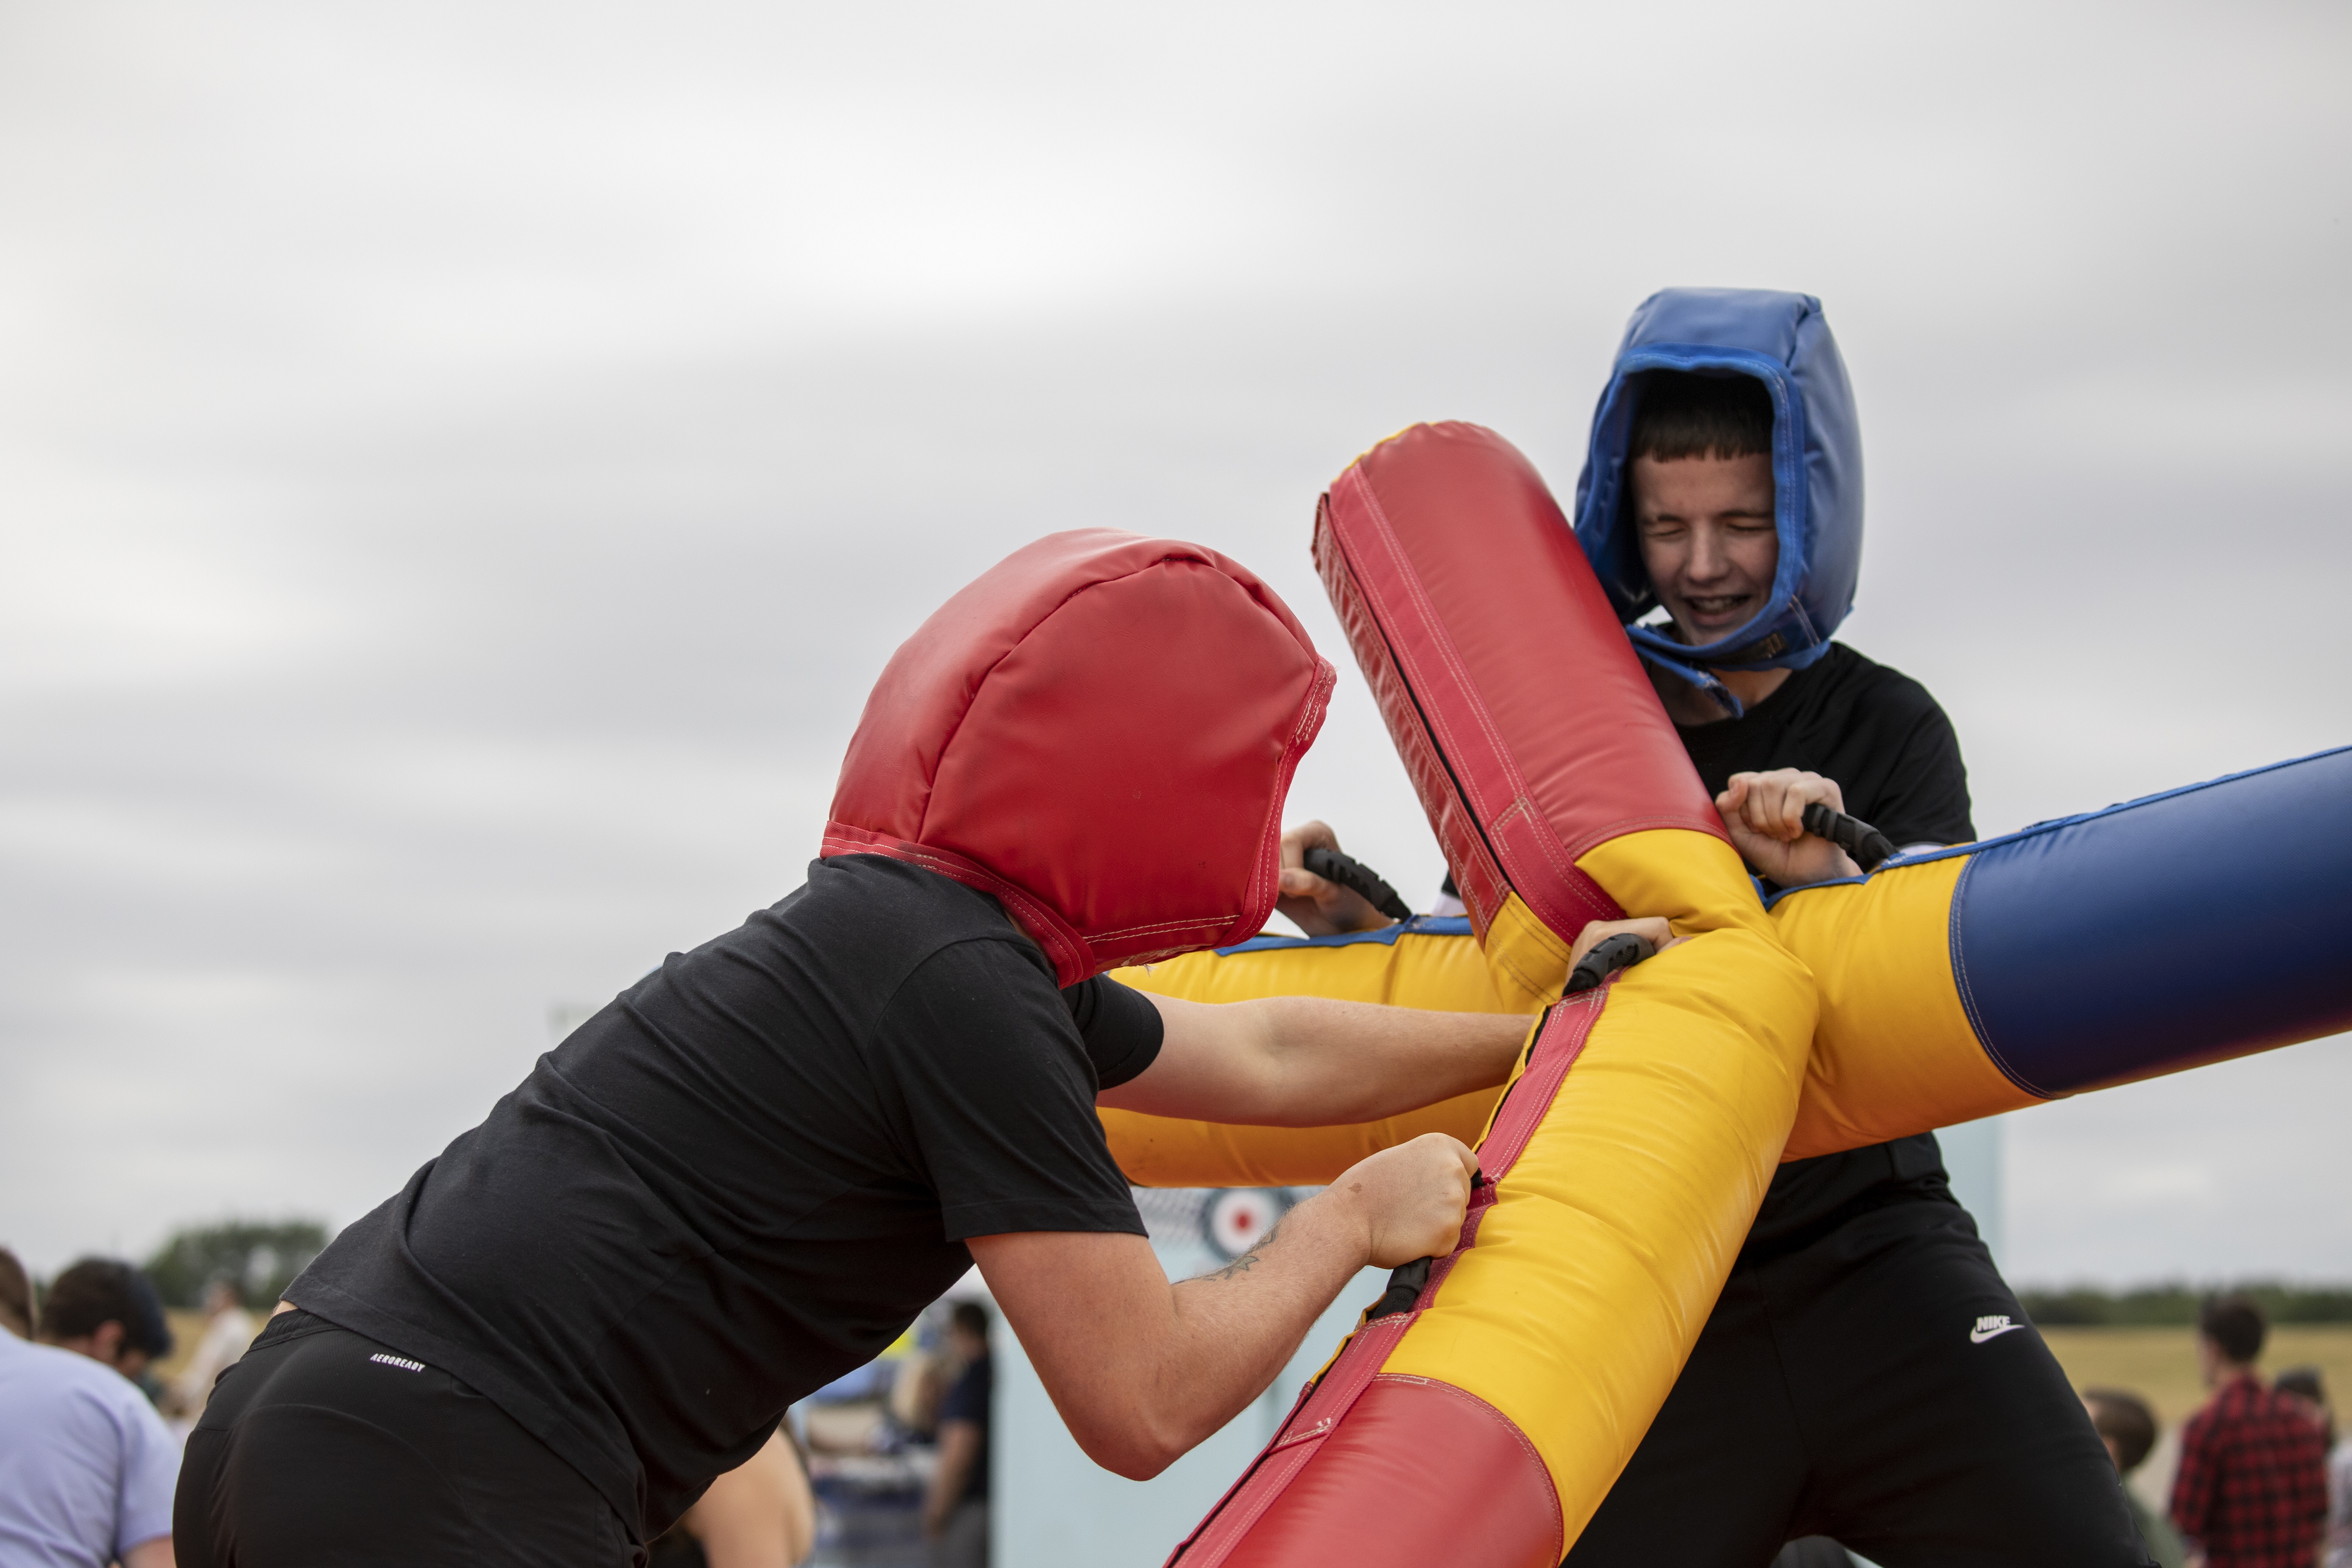 Children of all ages had plenty to keep them occupied with an inflatable “It’s a Knockout”